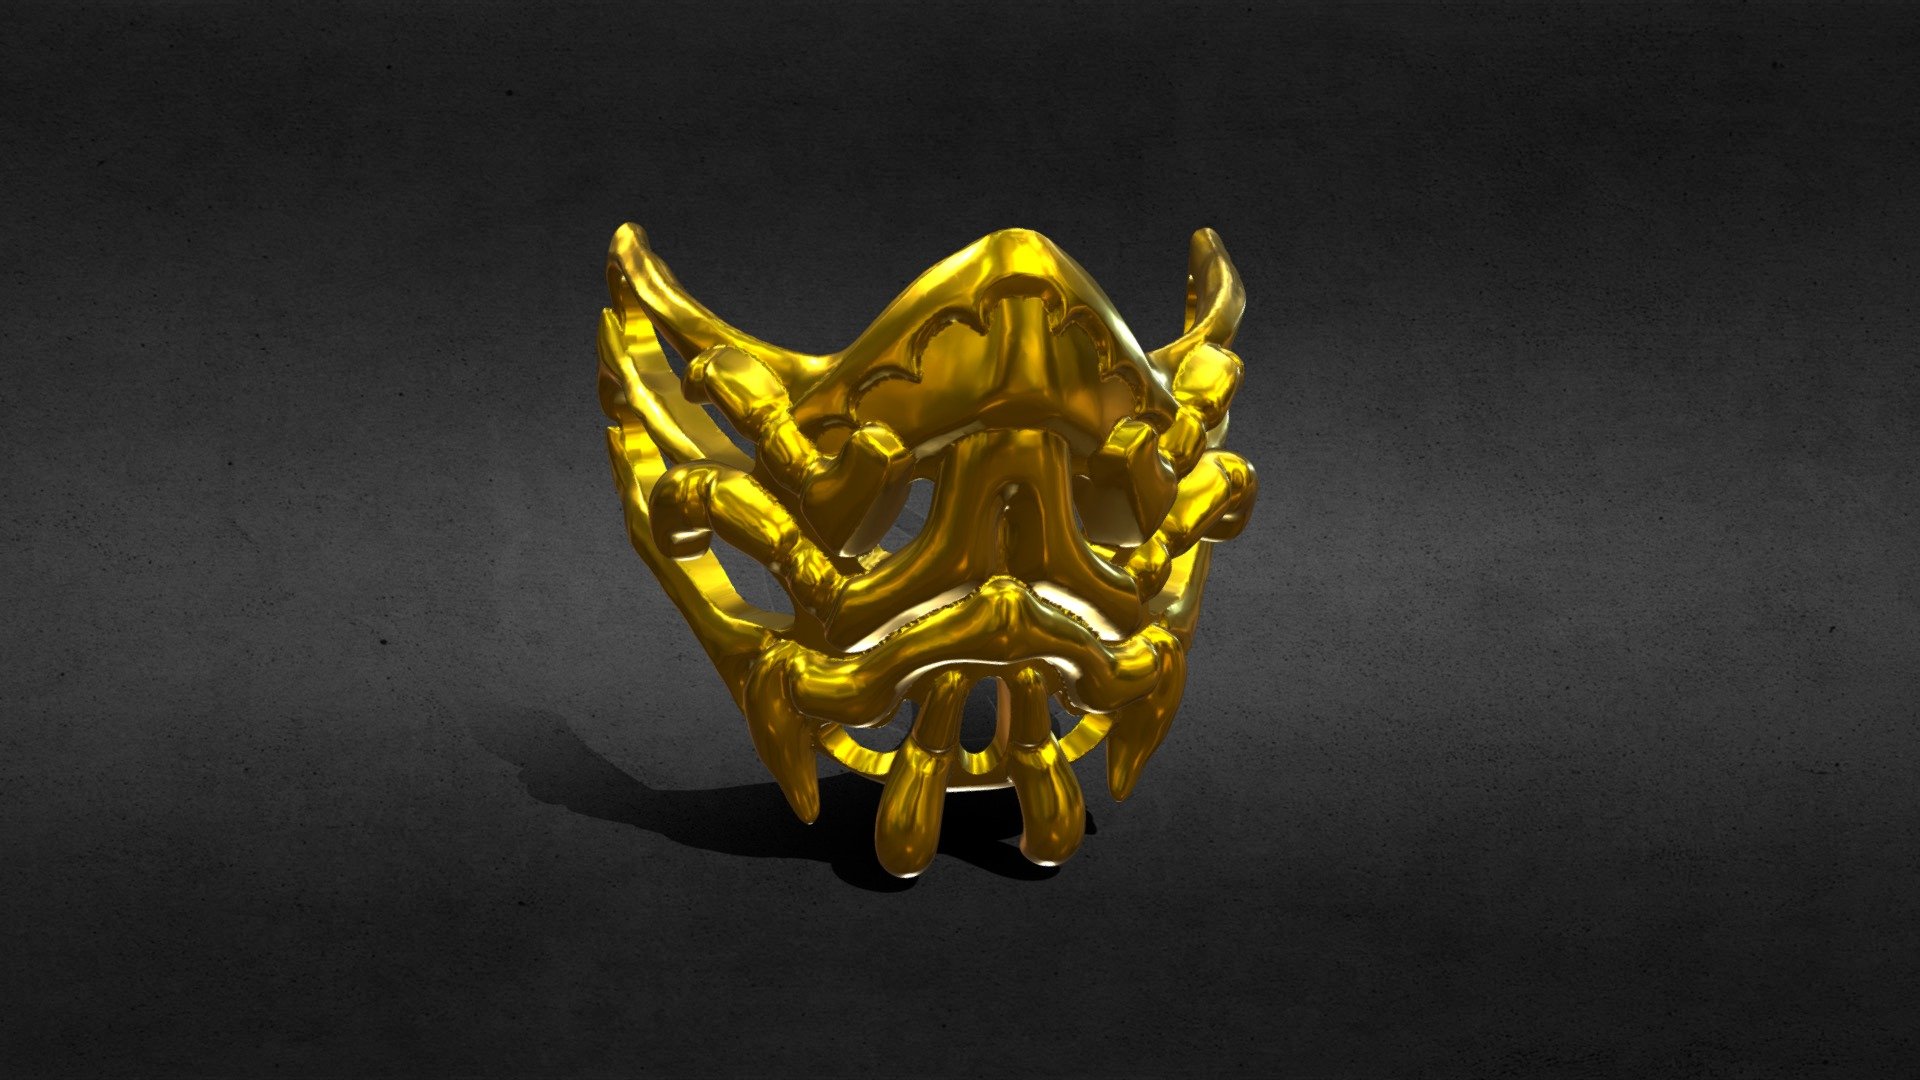 A quarantine mask inspired by Scorpion from the Video game Mortal Kombat ready for 3d printing the idea is to add a filter inside with another cloth mask this is for fashion doesn't prevent the COVID 19 virus I included the STL, OBJ and the ZBrush tool with straps and without it stay safe If you need 3d game assets or sculptures for 3d printing I can do commission works 3d model